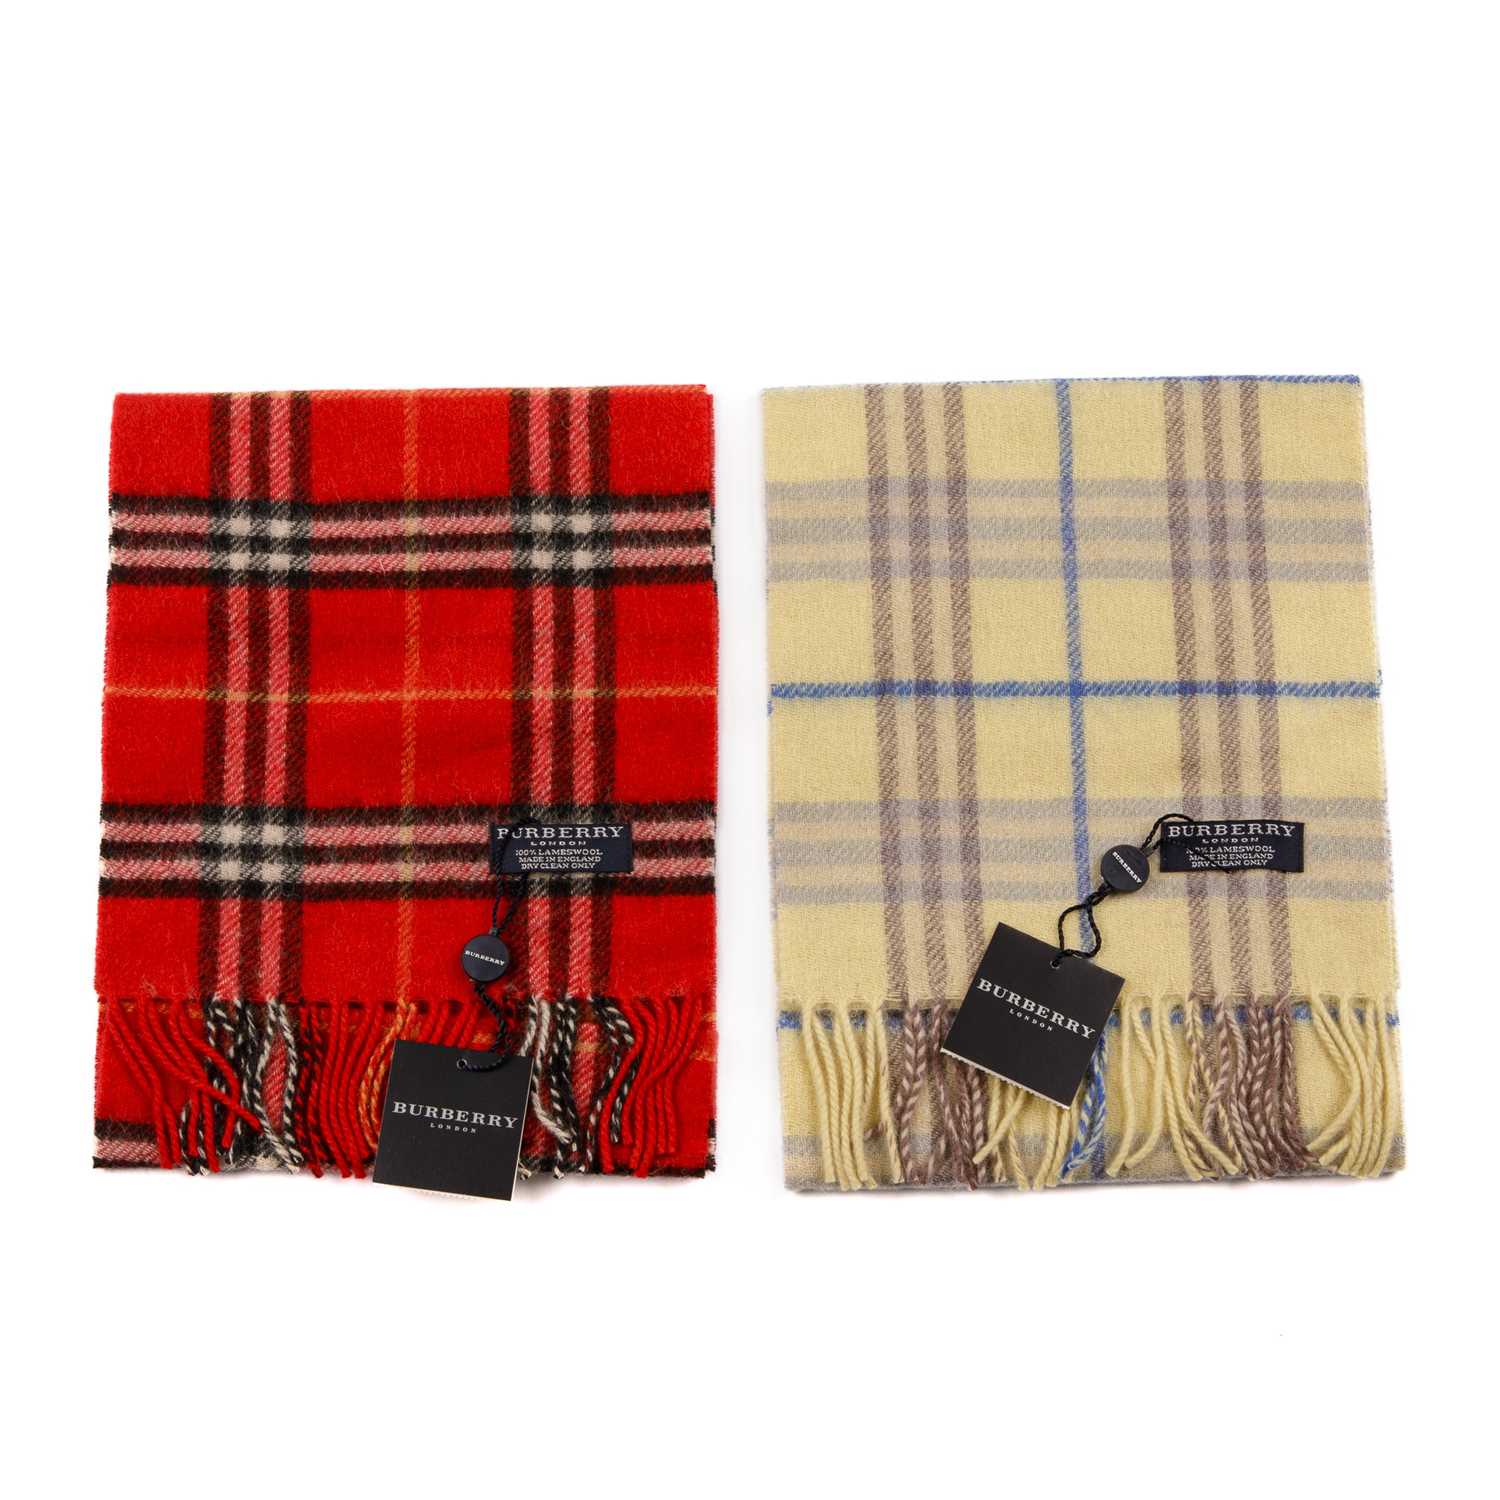 Burberry, two Nova Check lambswool scarves, to include a red scarf and a pale yellow scarf, both - Image 2 of 4